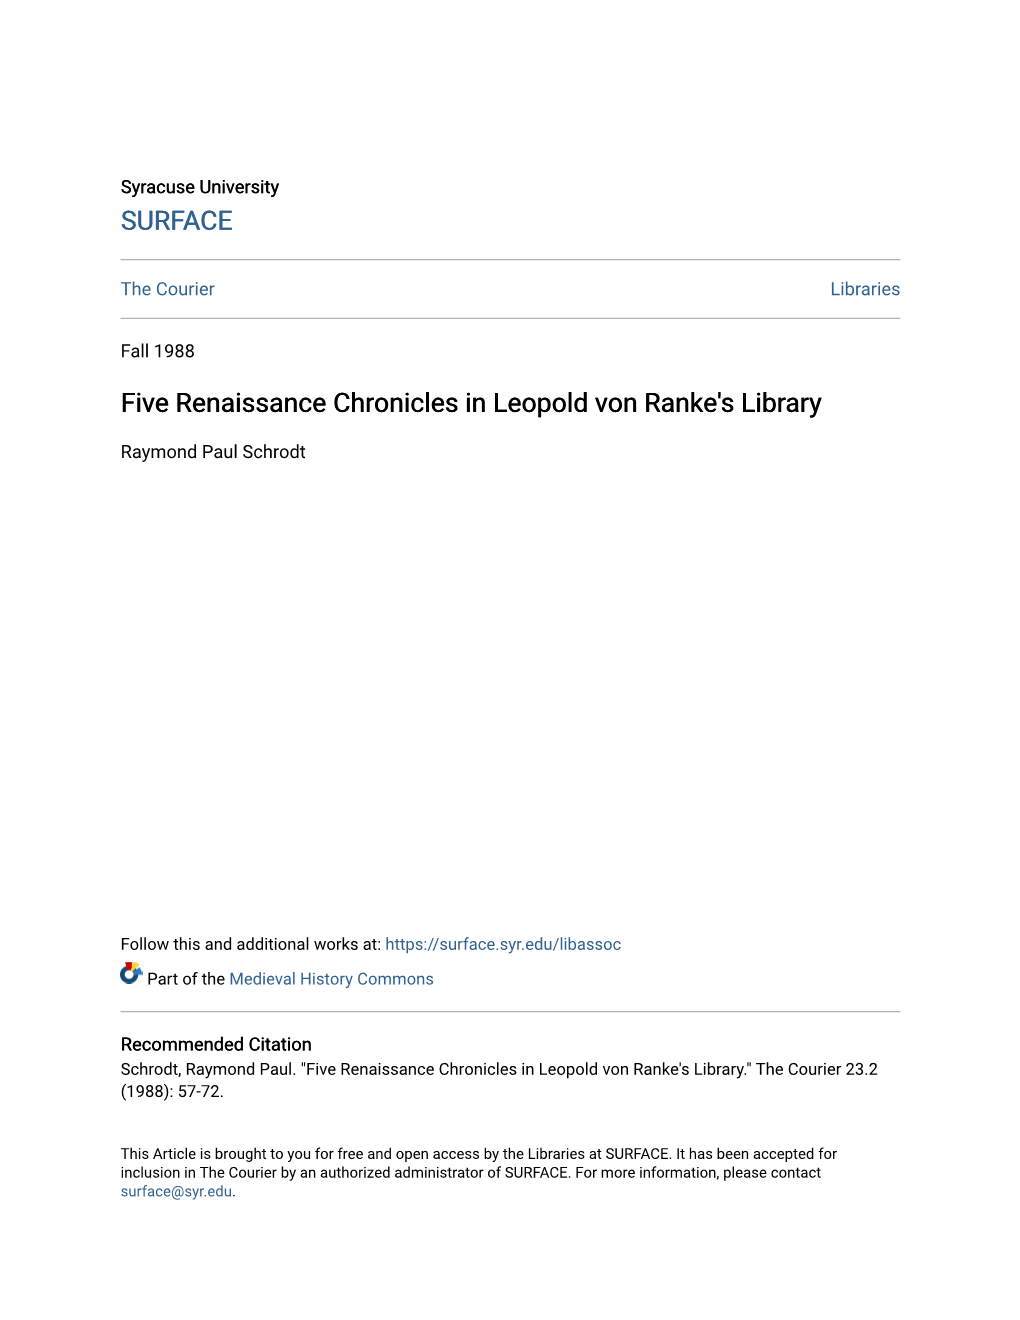 Five Renaissance Chronicles in Leopold Von Ranke's Library